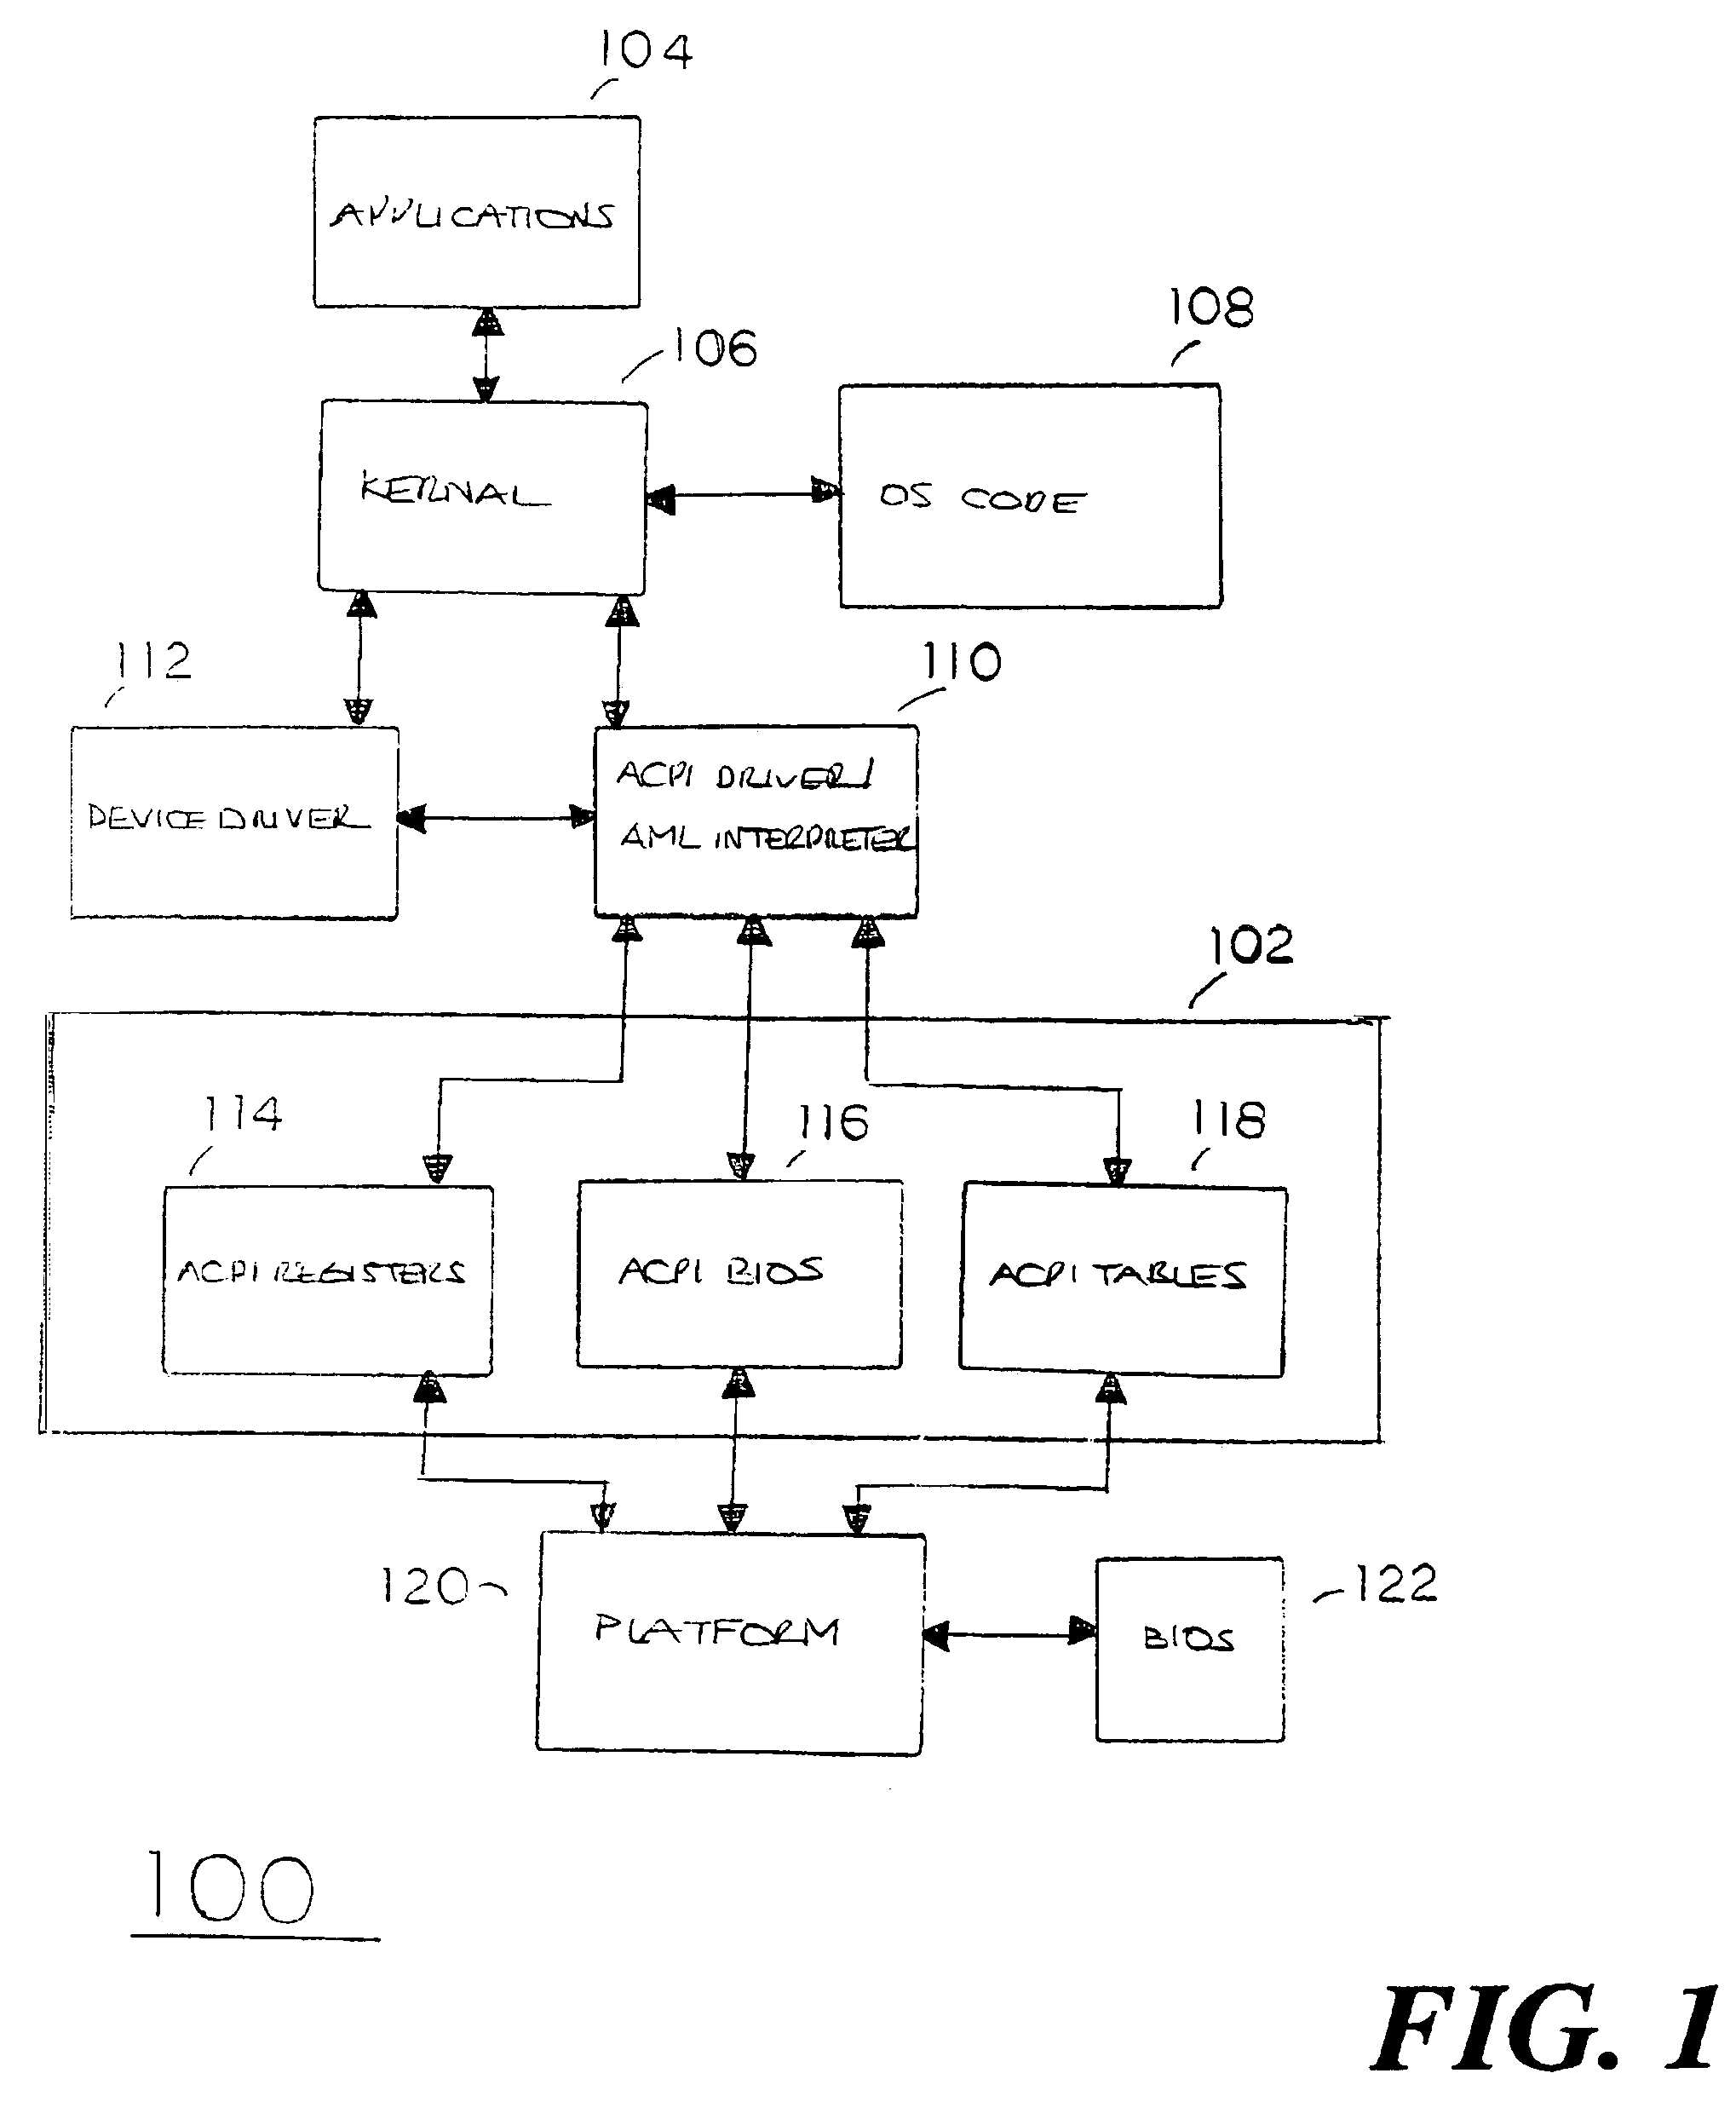 Method and apparatus for generating SMI from ACPI ASL control code to execute complex tasks